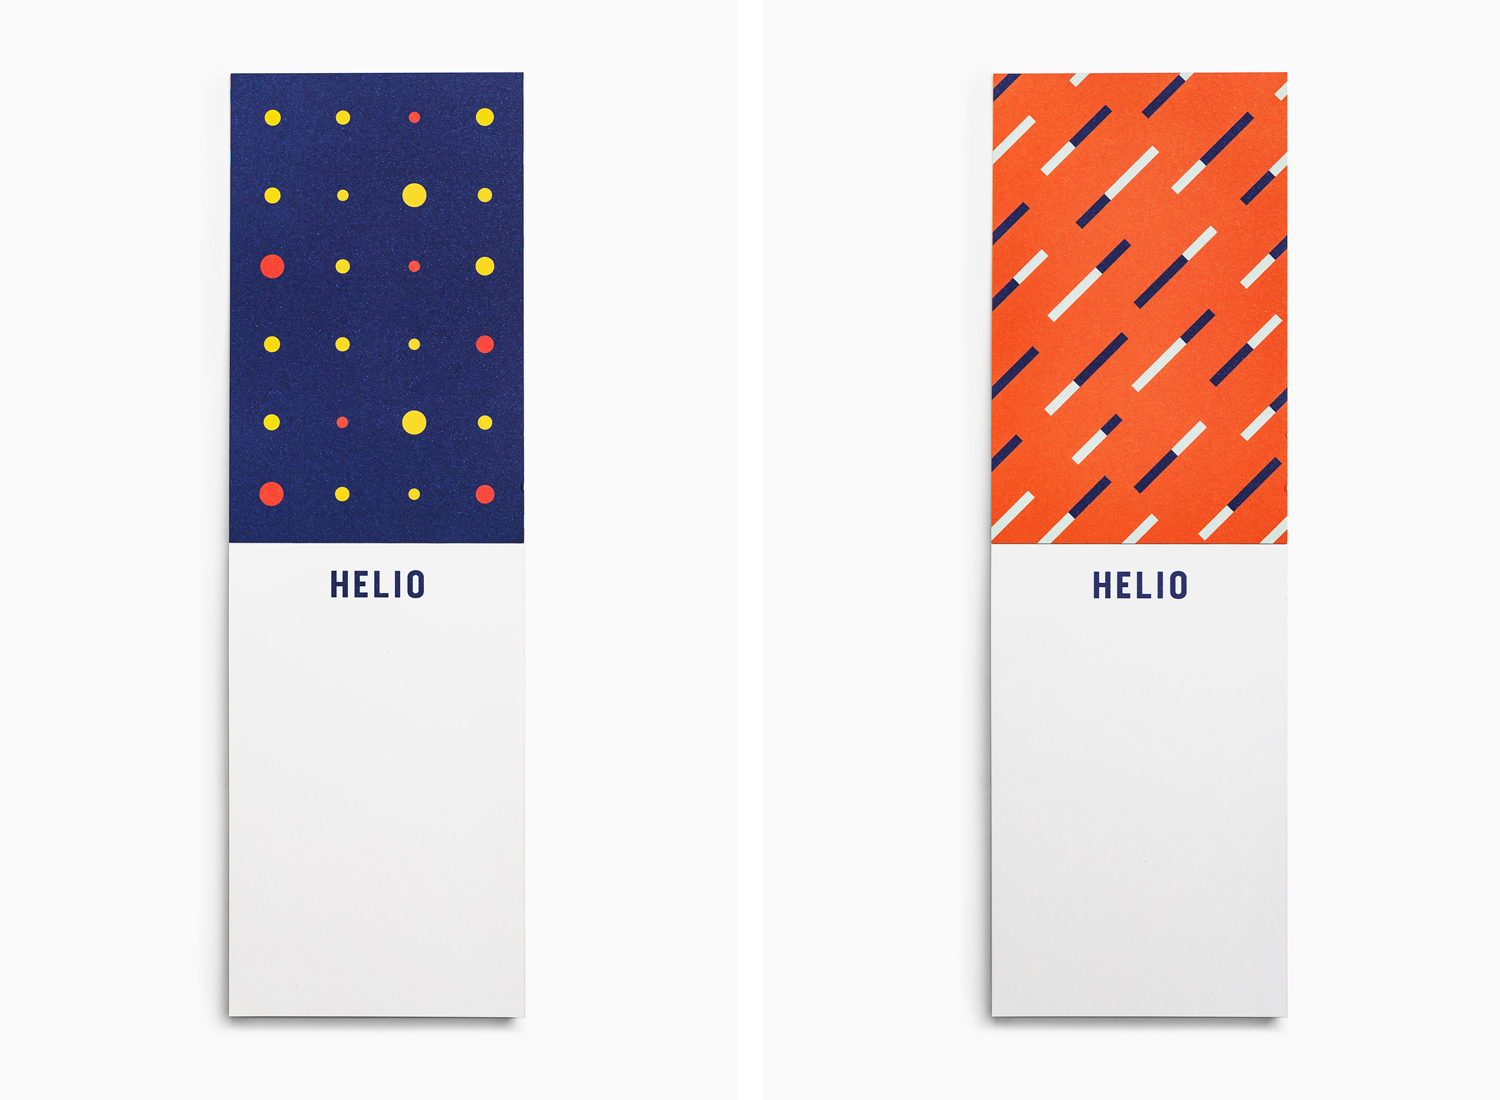 Visual identity, pattern and notepads by Bedow for Stockholm-based co-working space Helio